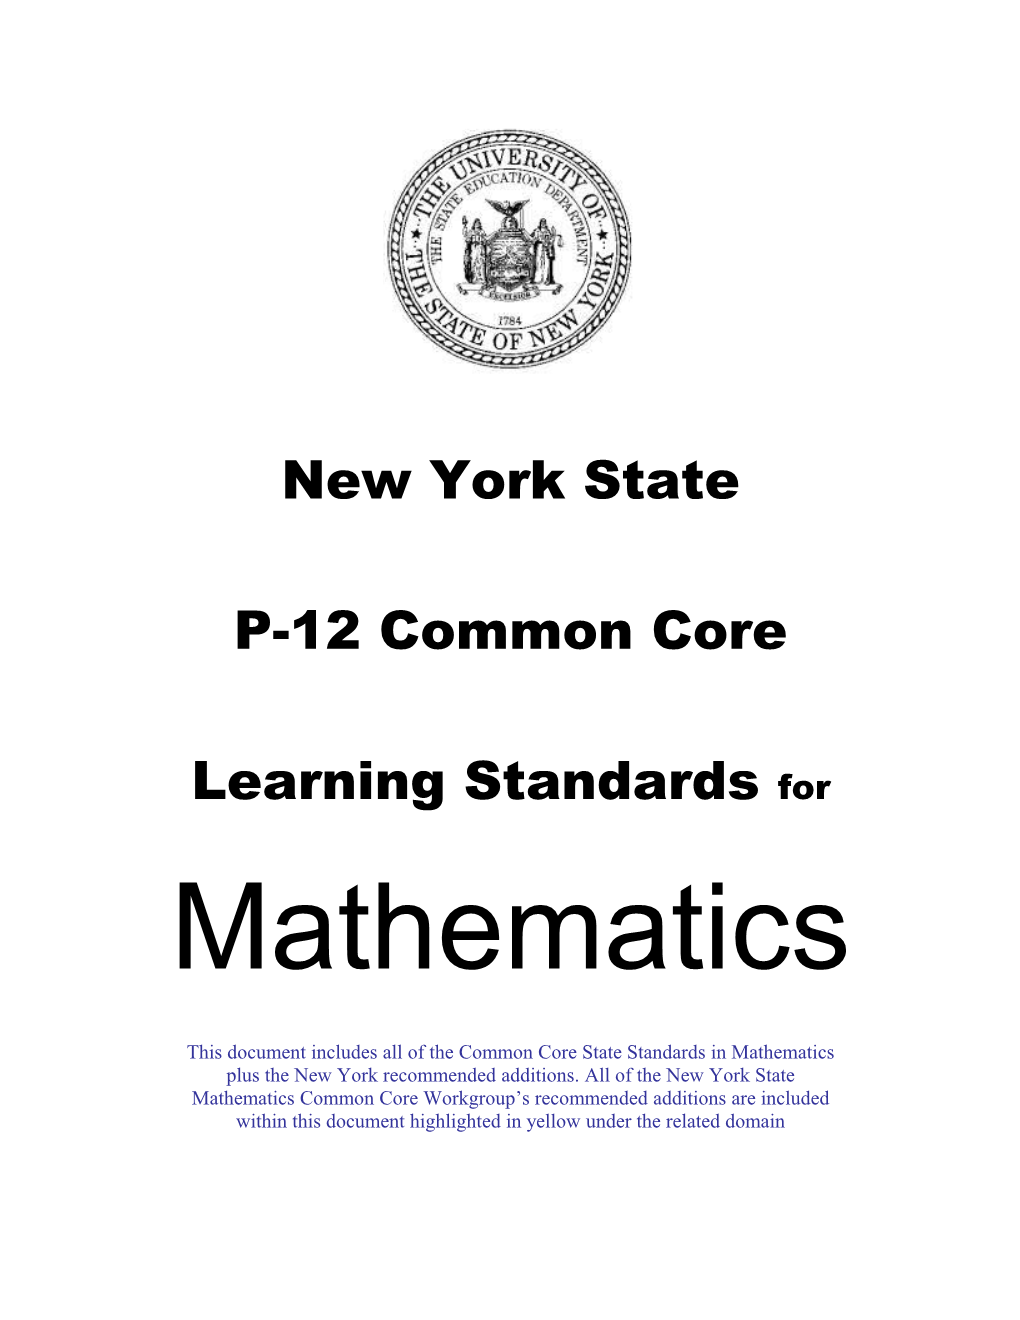 New York State P-12 Common Core Learning Standards For Mathematics